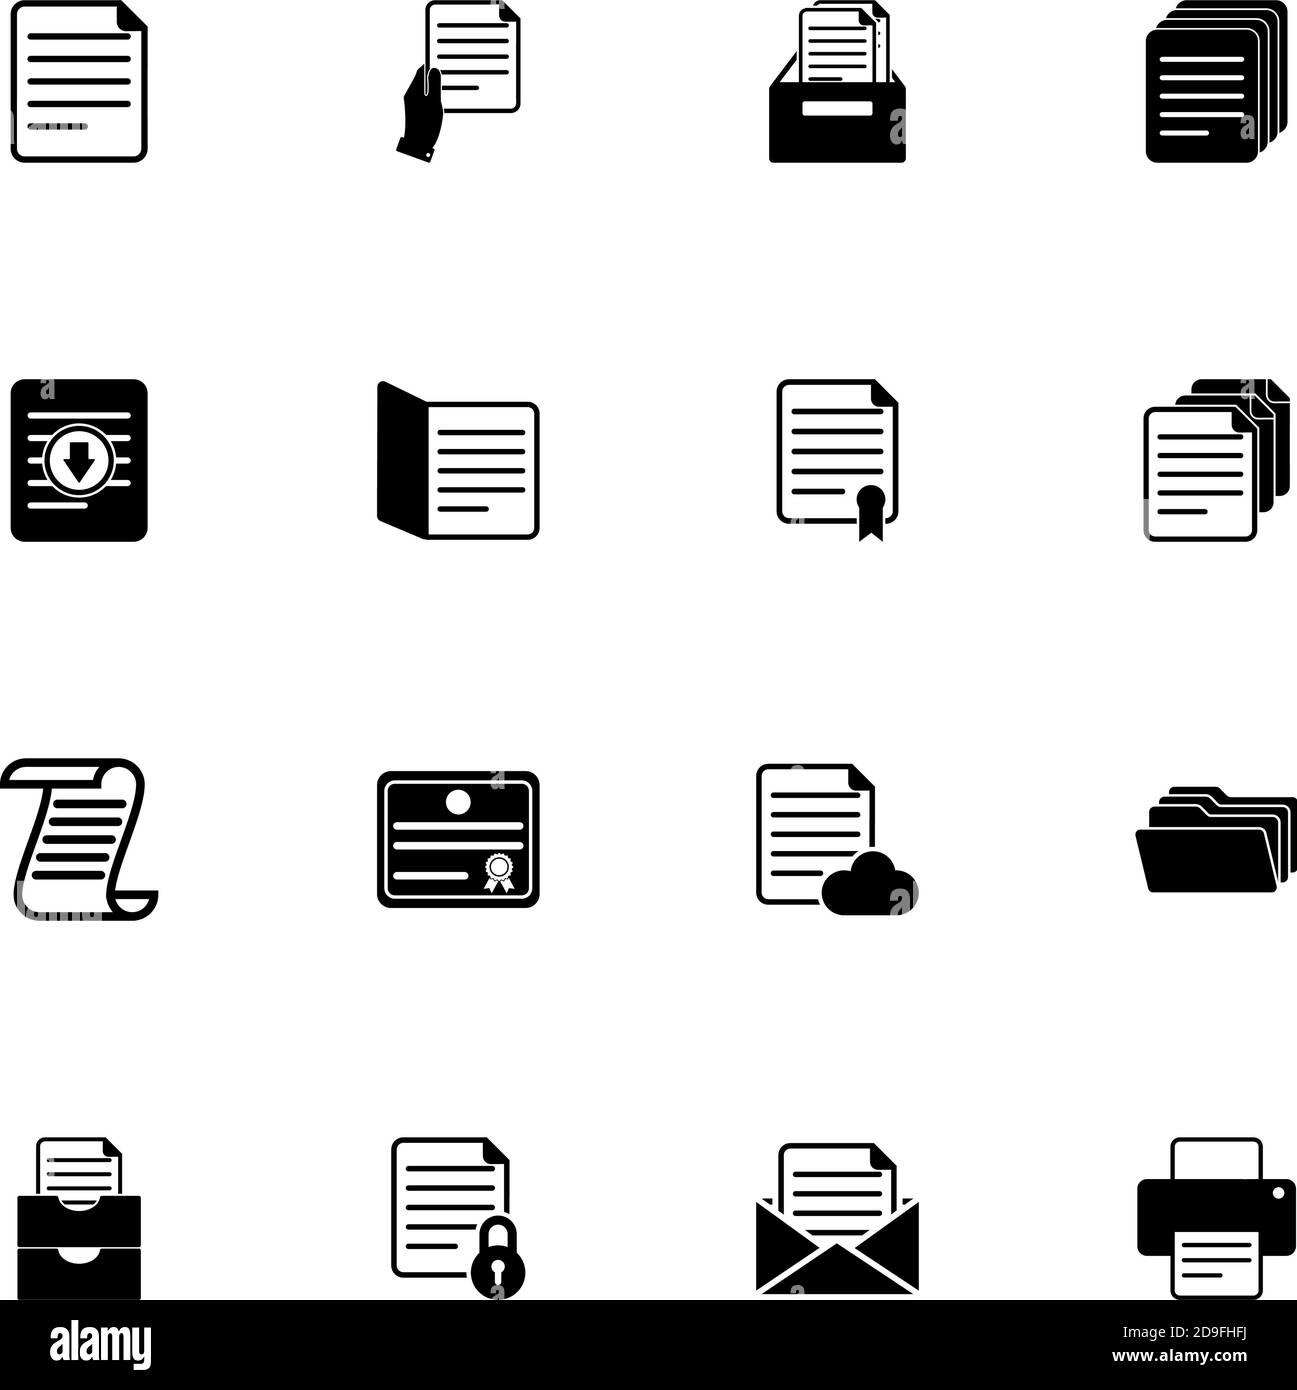 Documents icon - Expand to any size - Change to any colour. Perfect Flat Vector Contains such Icons as file, folder, scroll paper, portfolio, sheet, b Stock Vector